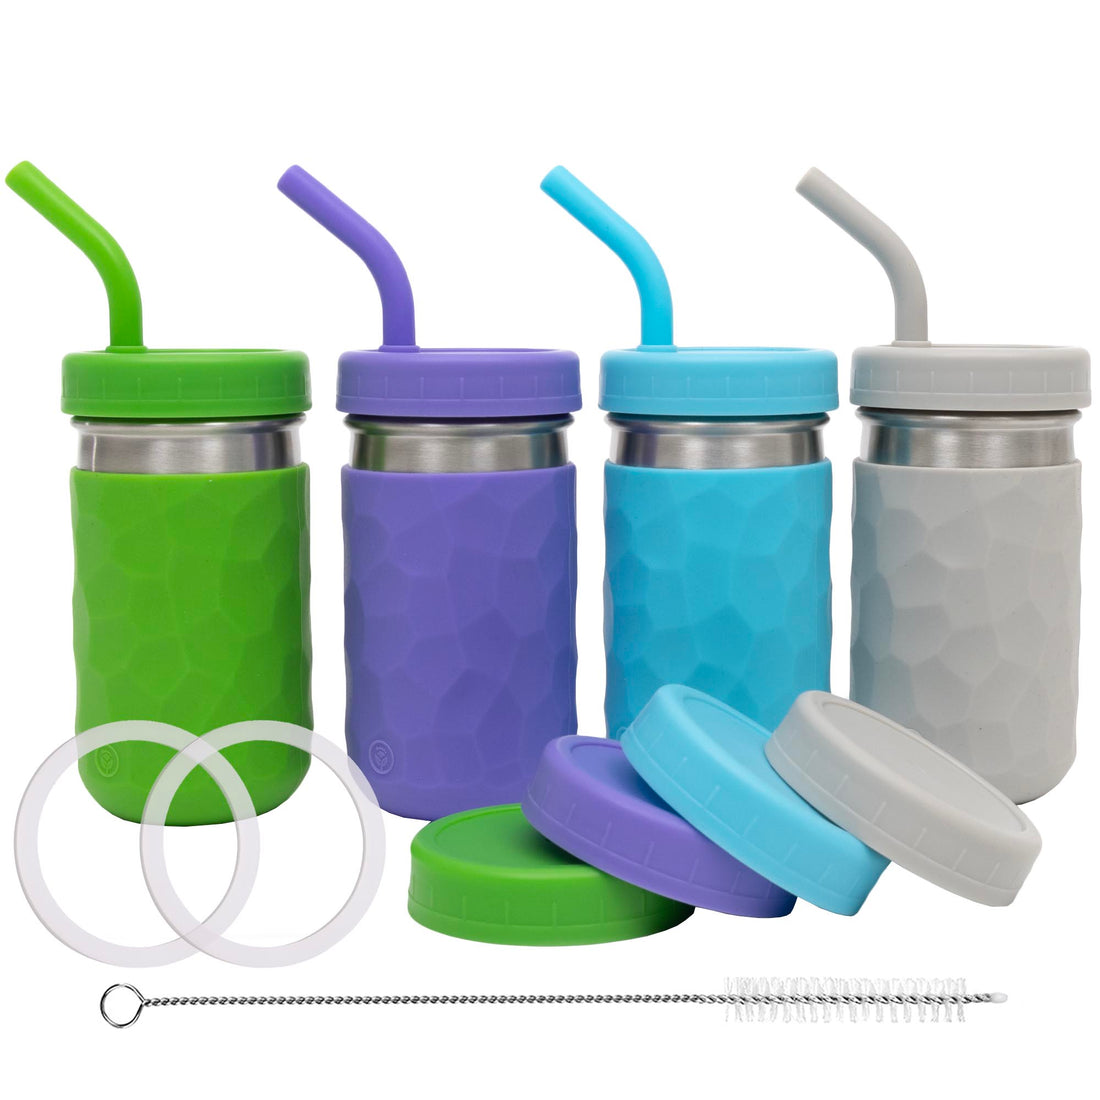 Silicone Sippy Cups with Straw for Toddler, Size: Water Cup, Blue